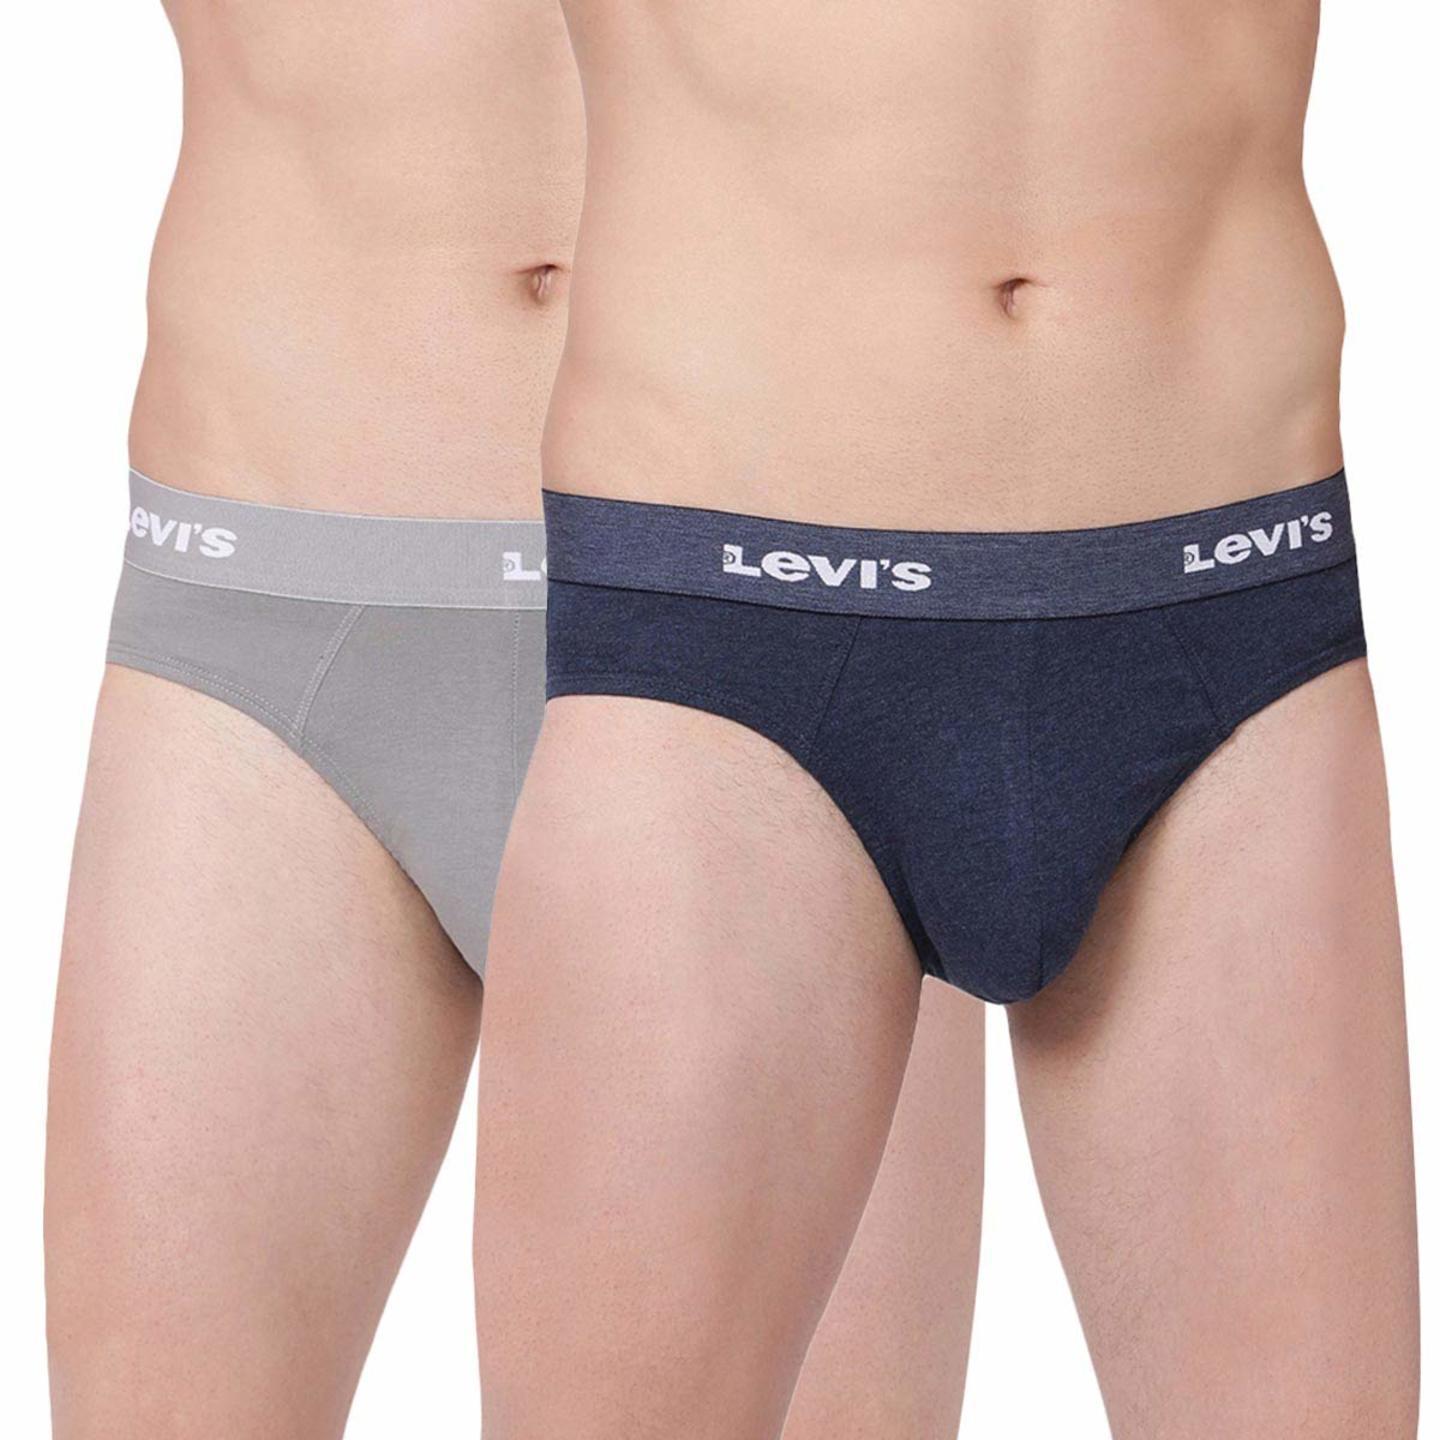 Levis Mens 100 Cotton 100 CA Solid Neo Brief Snug Fit Pack of 2